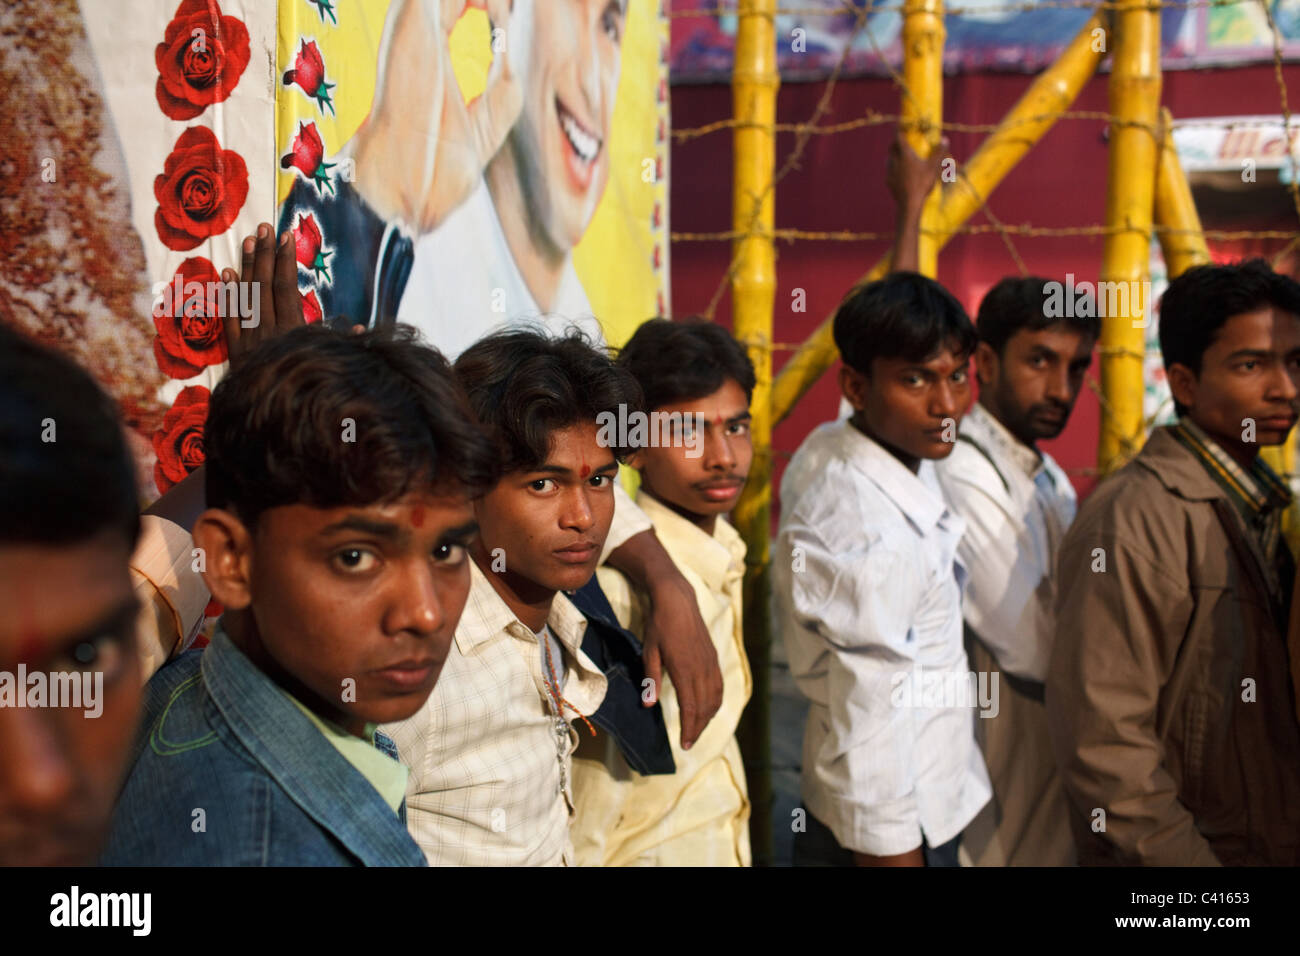 Young men queue up for a show featuring young dancing women at Sonepur Mela in Sonepur near Patna and Hajipur in Bihar state. Stock Photo